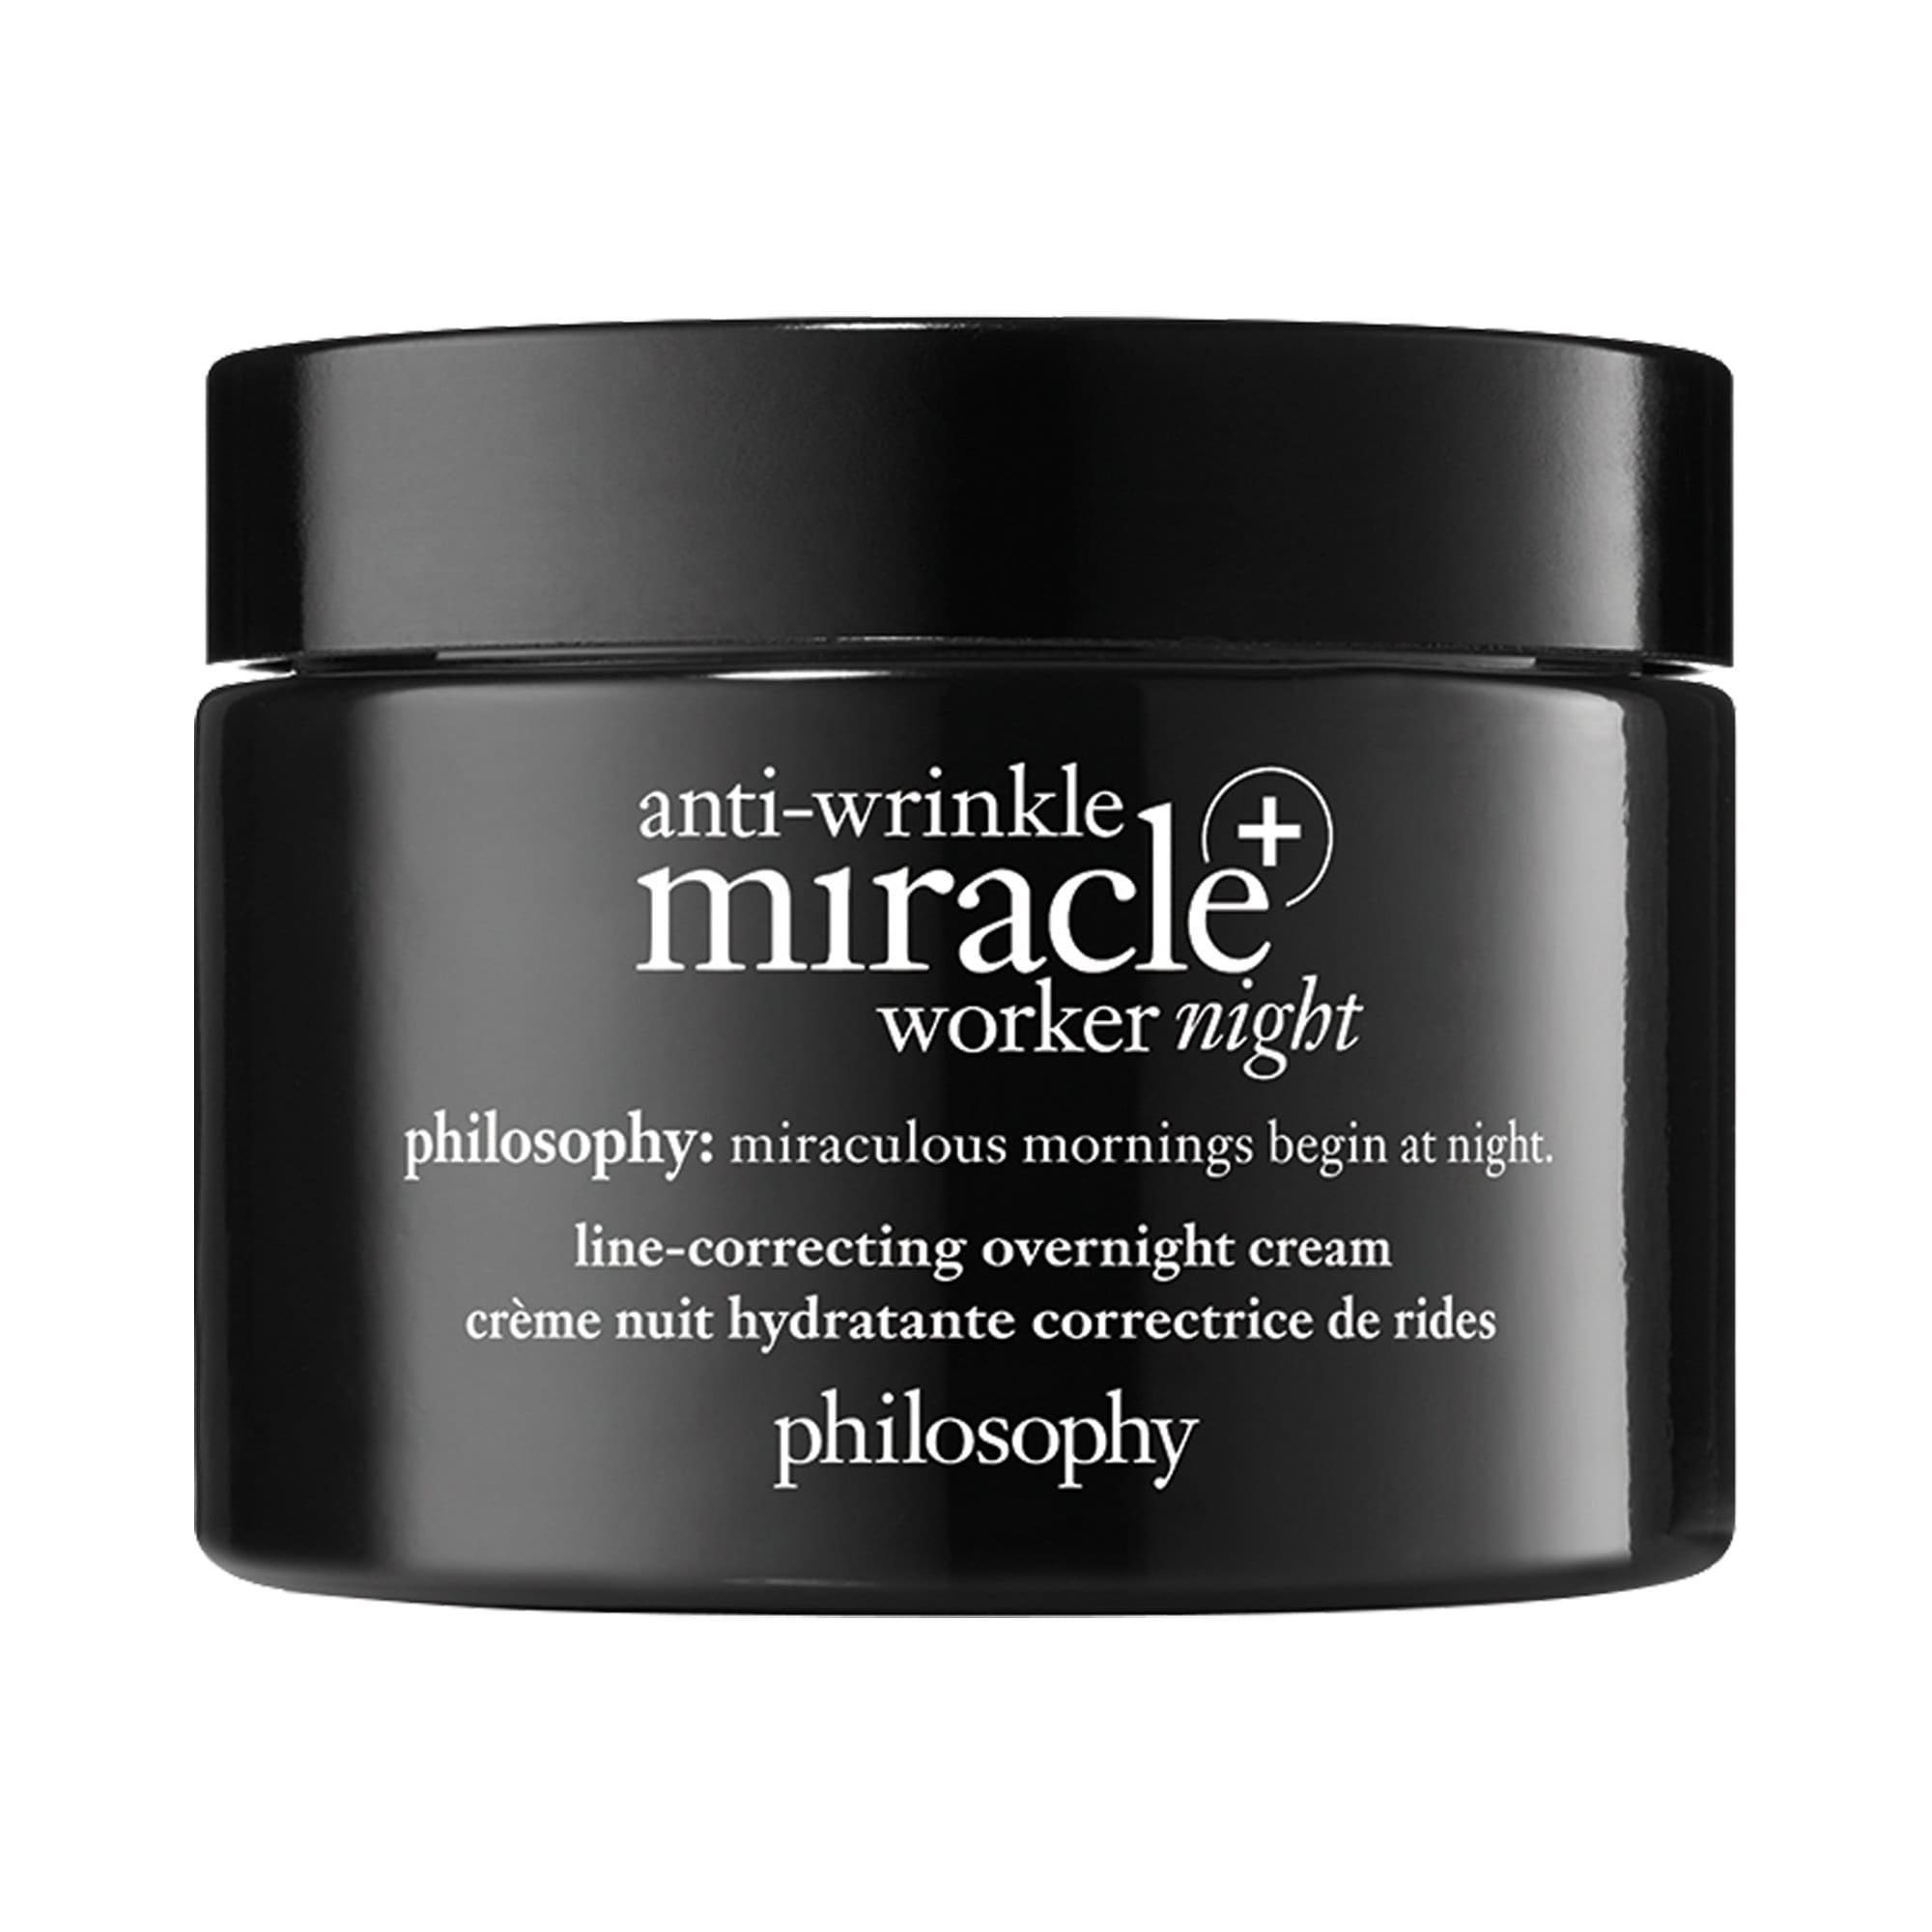 Anti-Wrinkle Miracle Worker Line-Correcting Overnight Cream